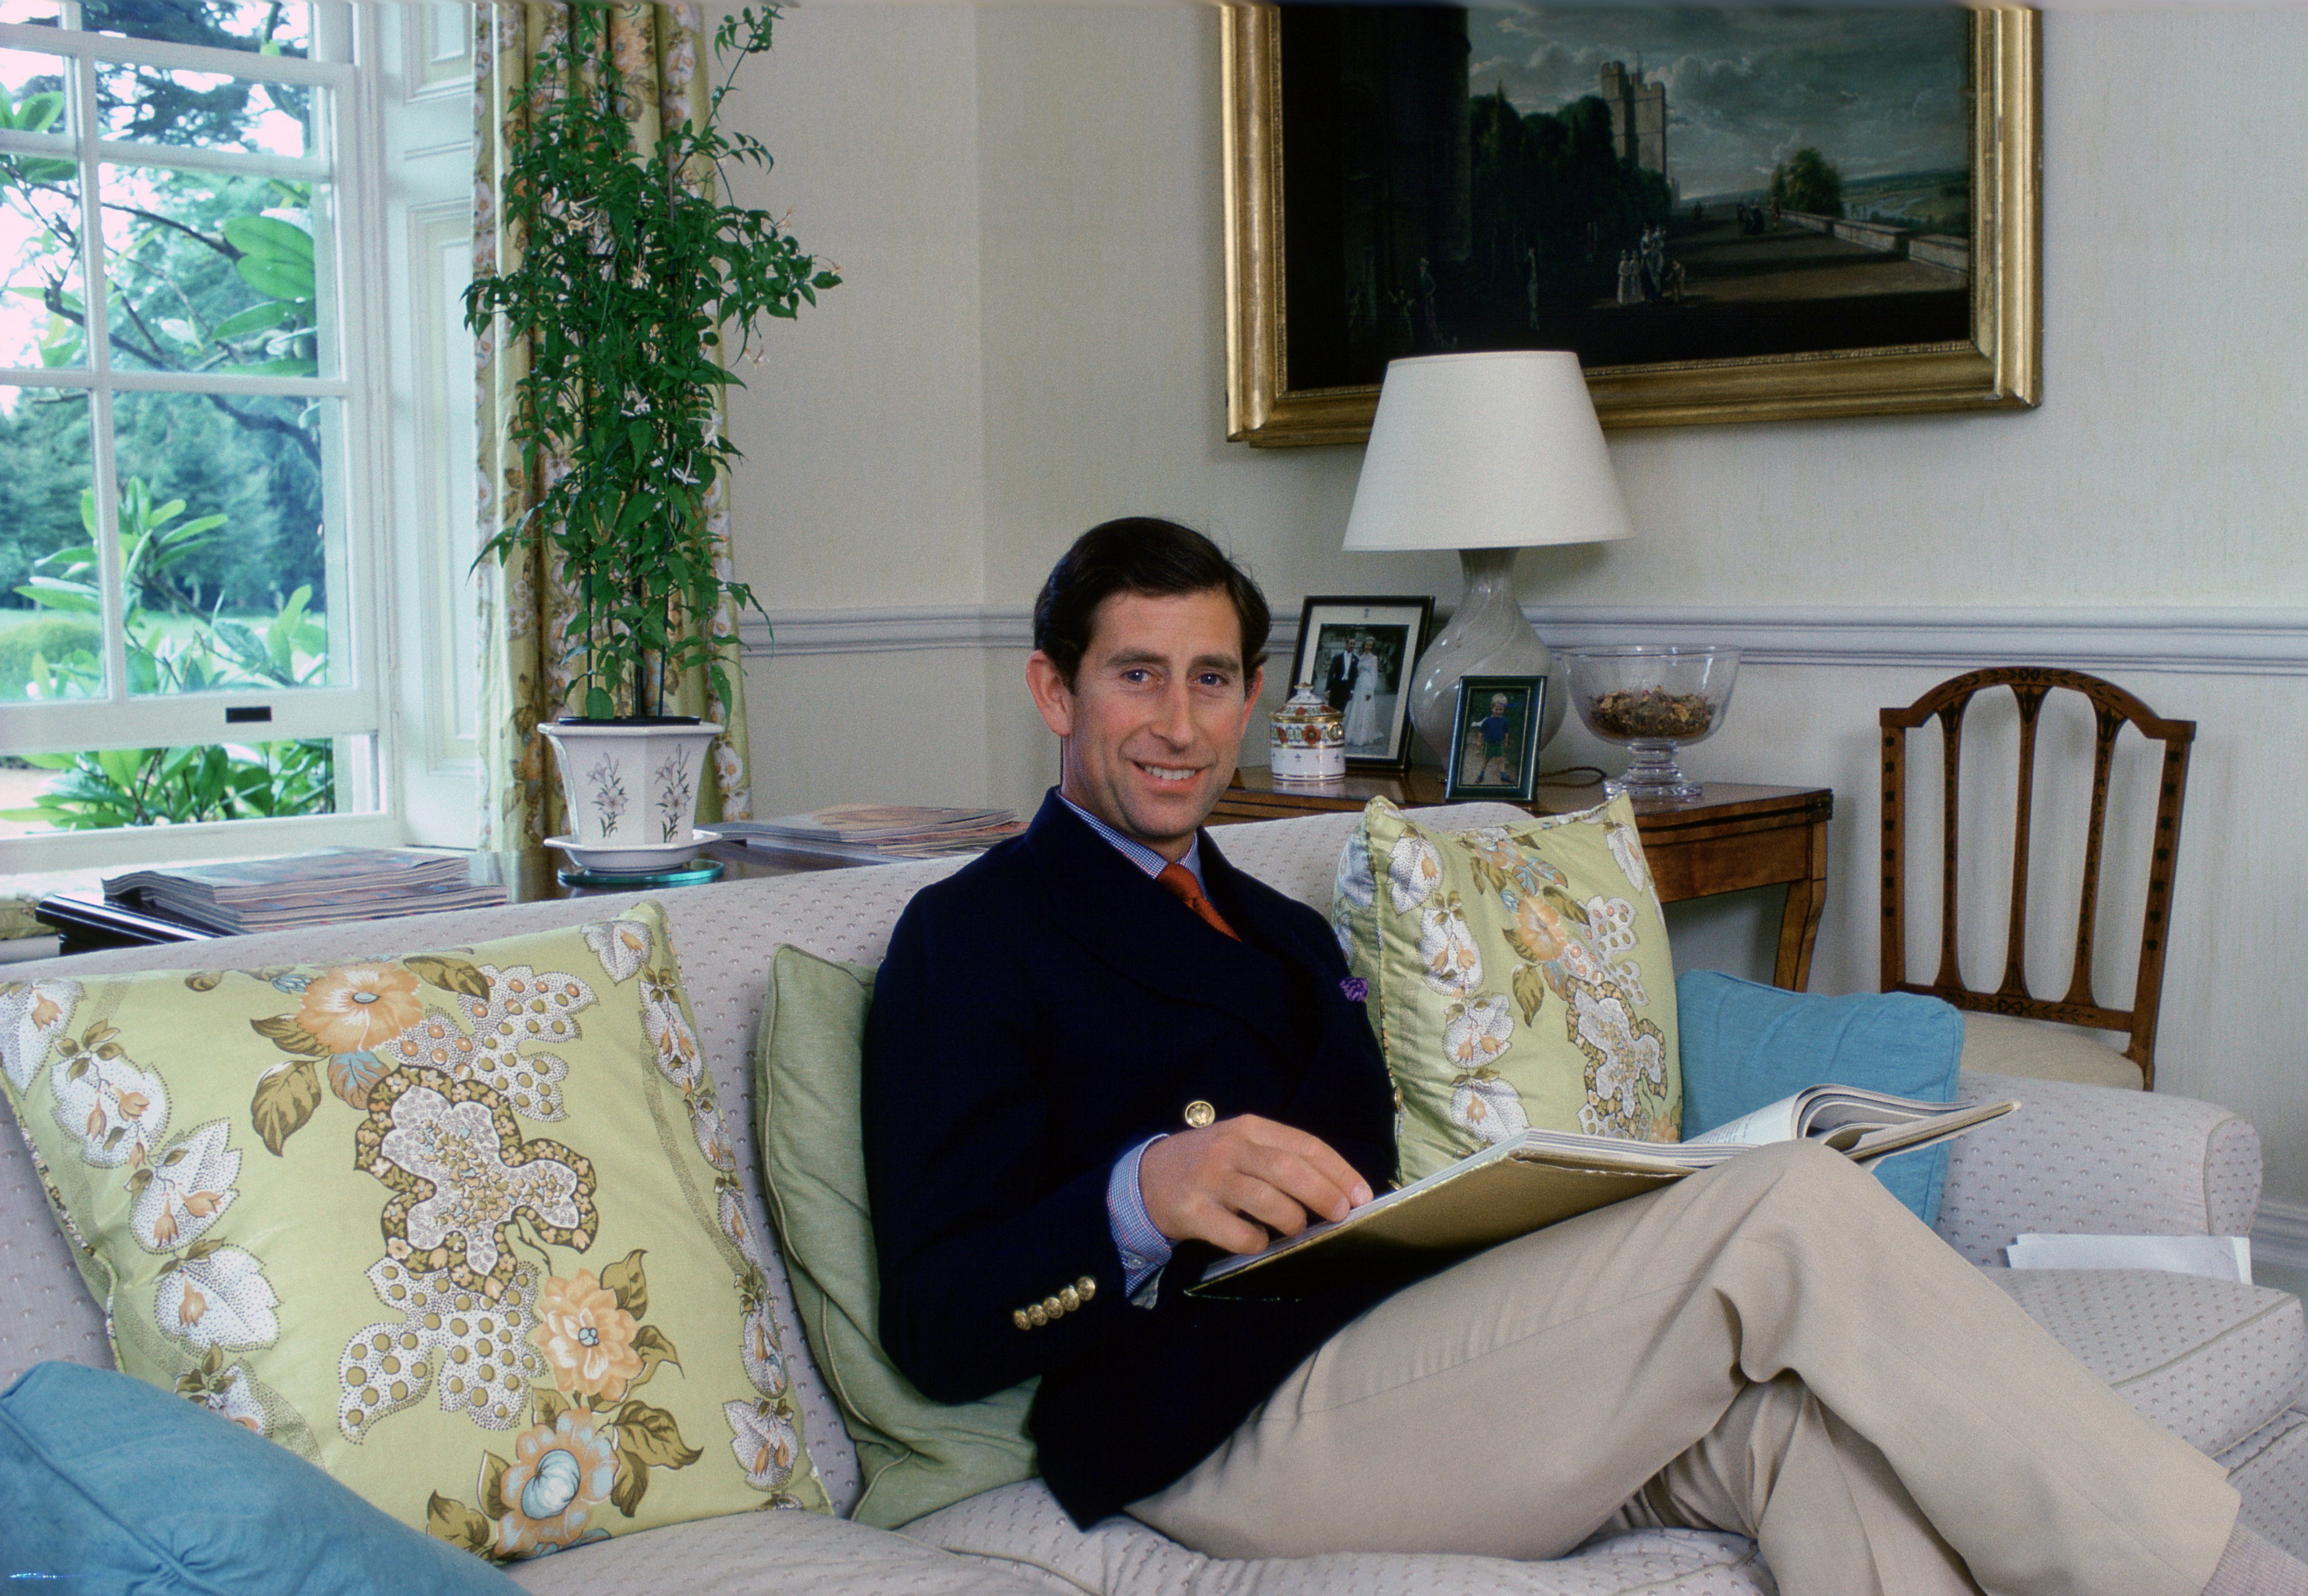 King Charles Sitting In His Living Room At Home In Highgrove House. | Source: Getty Images